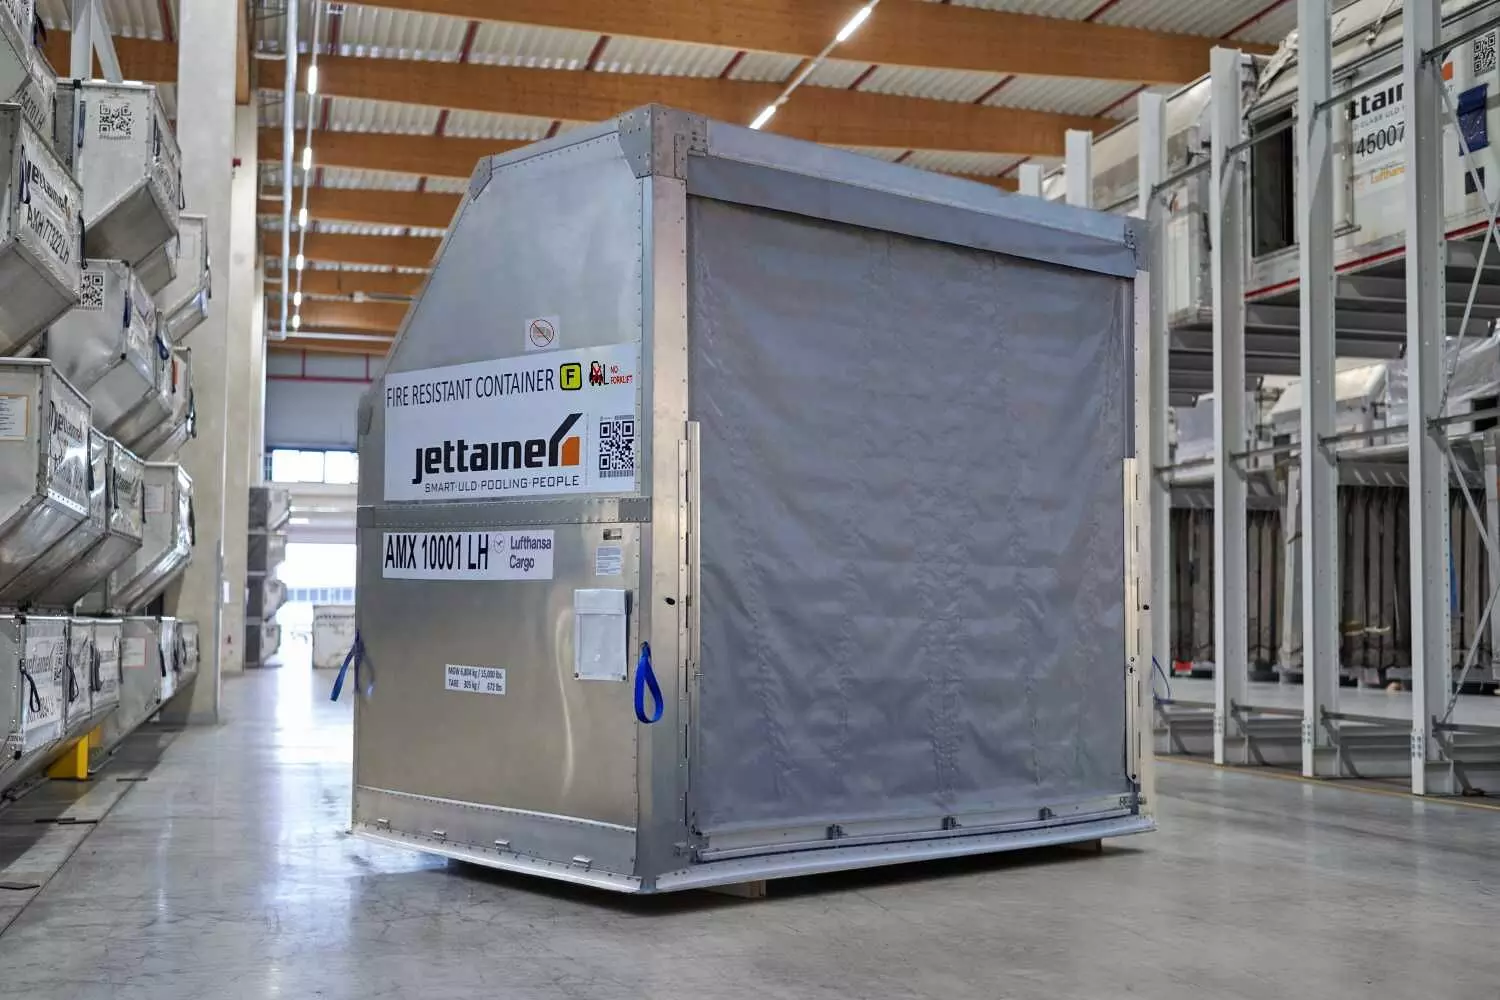 Lufthansa Cargo uses fire-resistant containers from Jettainer